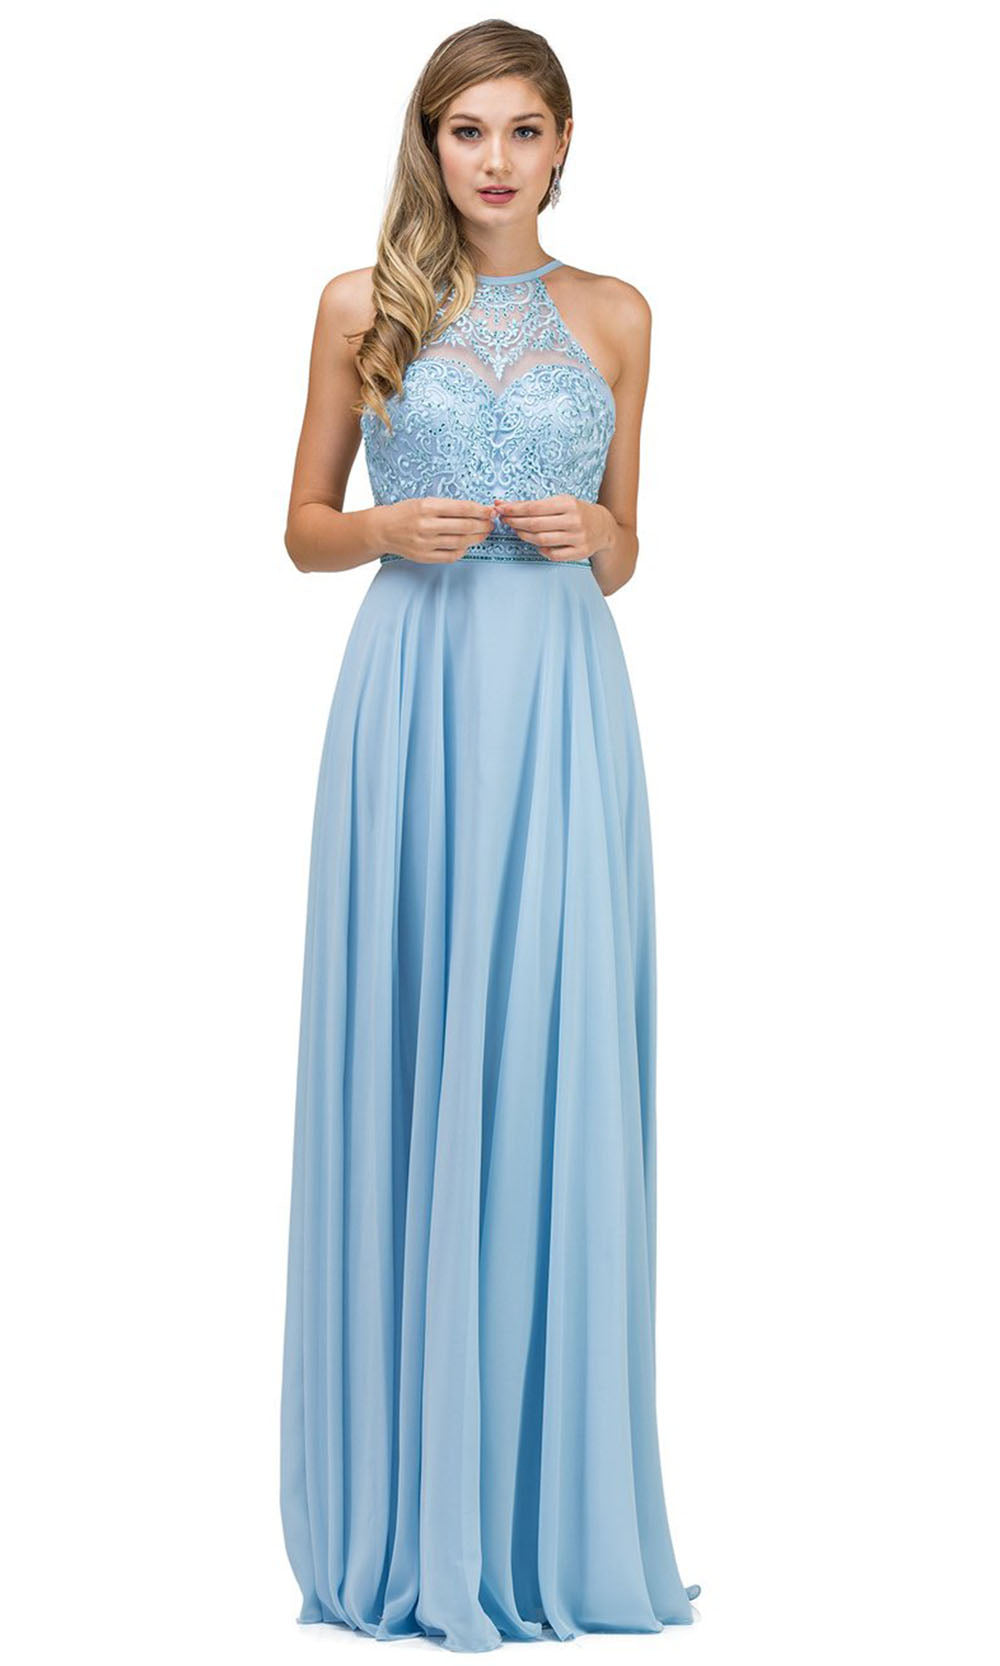 Dancing Queen - 2092 Embroidered Halter Neck A-Line Dress In Blue